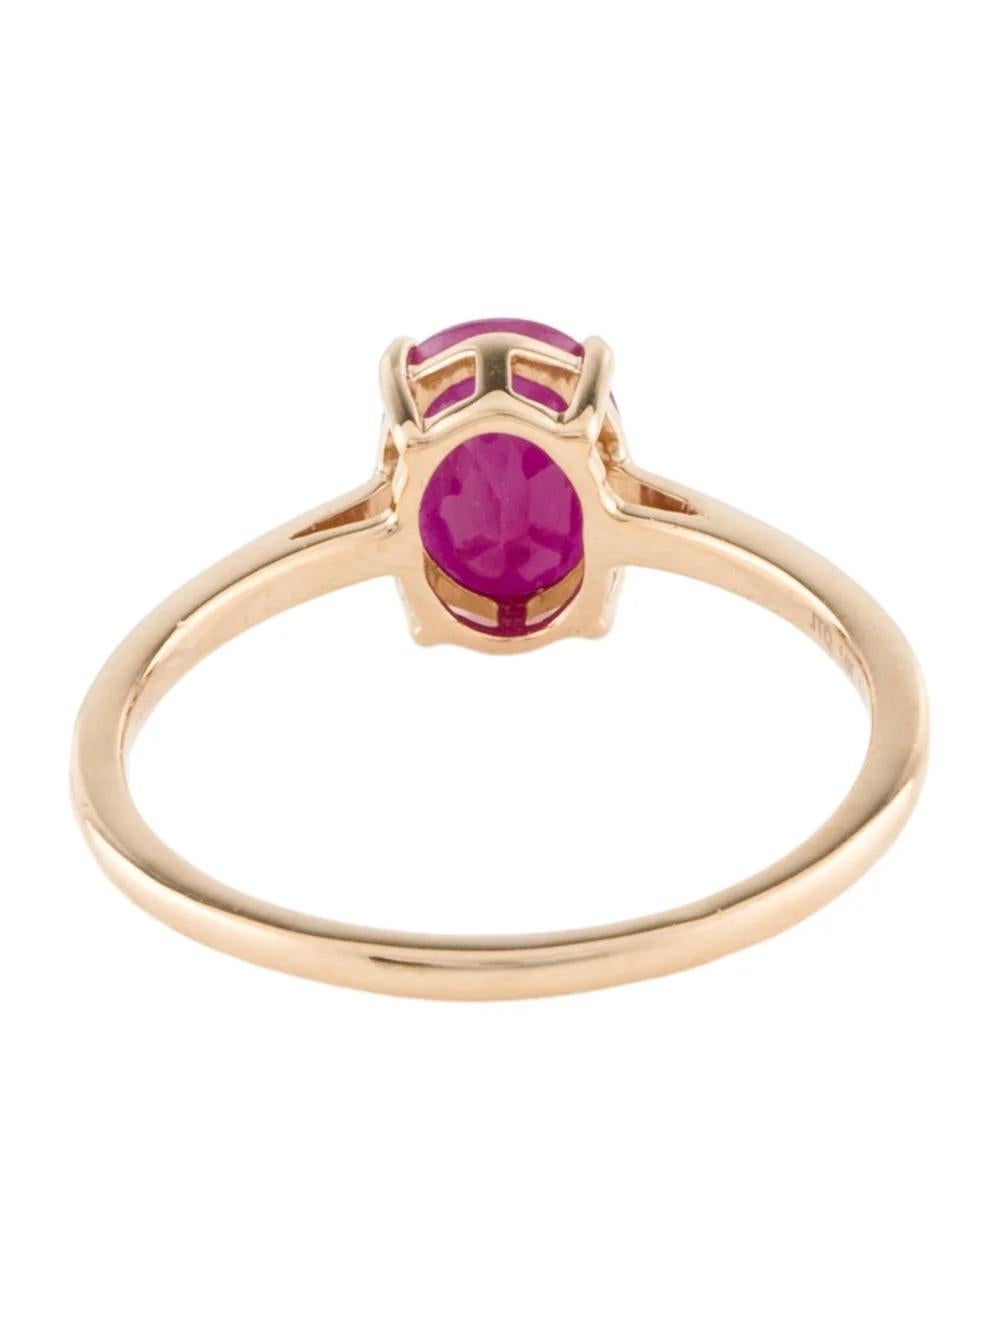 14K Ruby Cocktail Ring - 1.13ct, Size 7, Timeless Elegance, Vibrant Gemstone In New Condition For Sale In Holtsville, NY